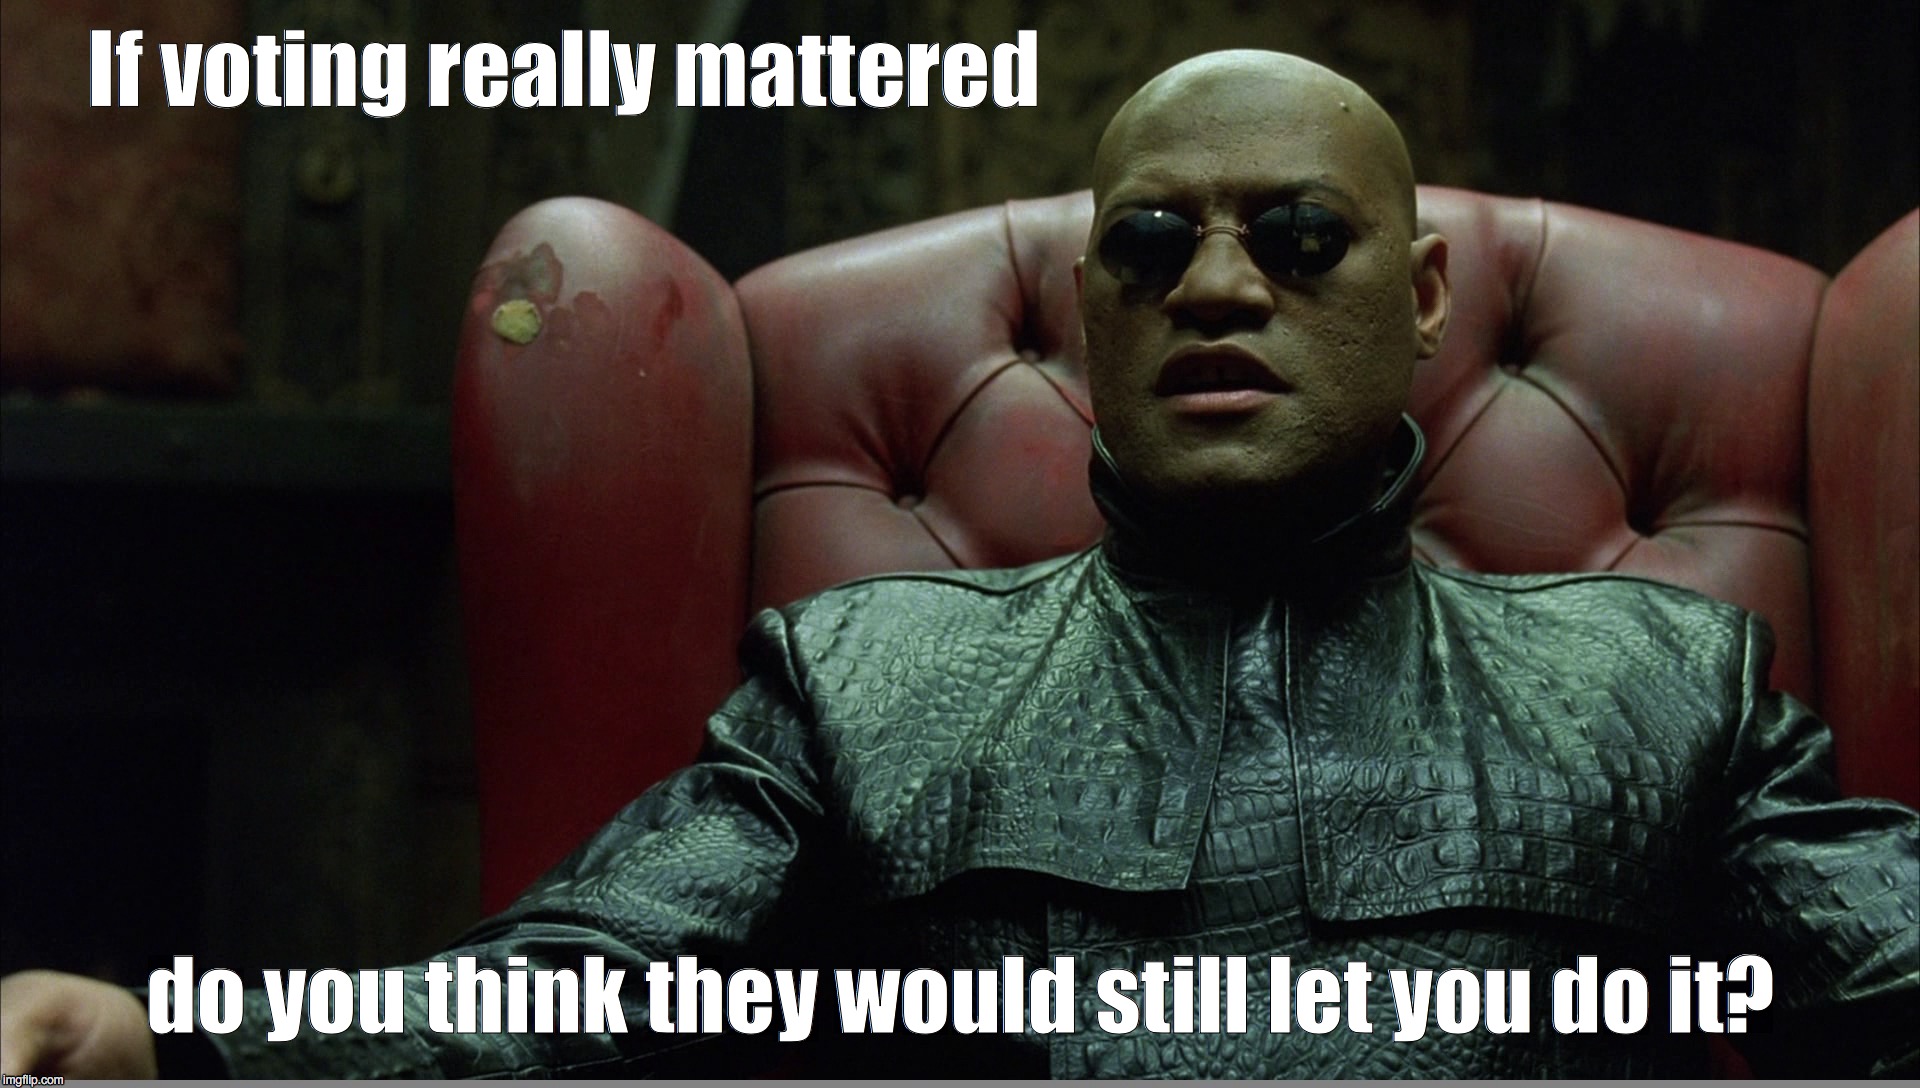 if voting mattered | If voting really mattered do you think they would still let you do it? | image tagged in voting,vote,matrix | made w/ Imgflip meme maker